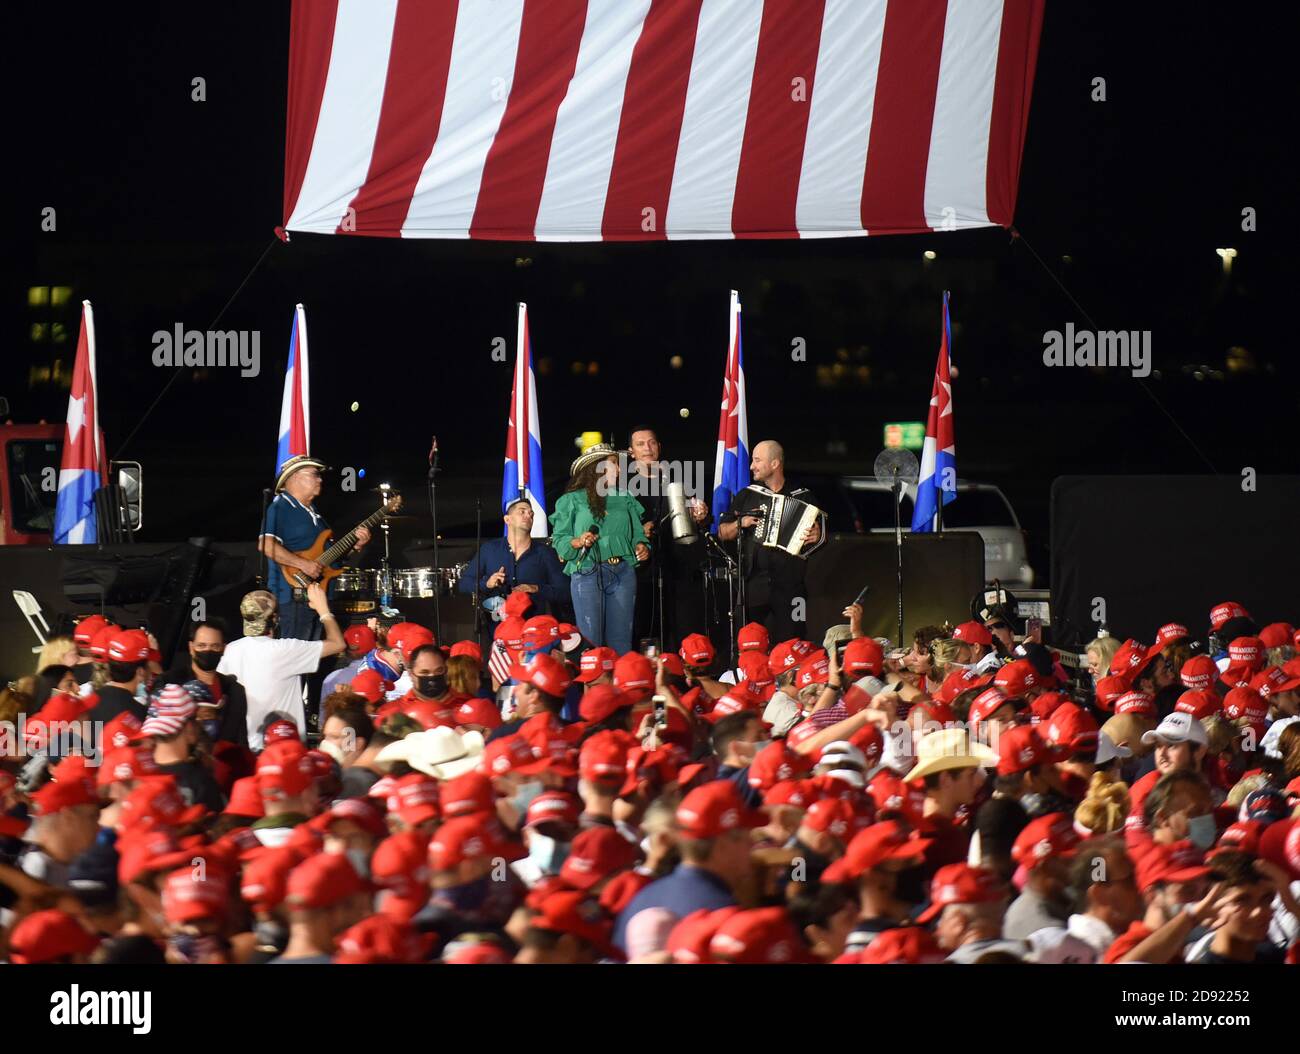 Opa Locka, United States. 01st Nov, 2020. November 1, 2020 - Opa-Locka, Florida, United States - The musical group Los 3 De La Habana performs as people wait to hear U.S. President Donald Trump speak at a campaign rally at Miami-Opa Locka Executive Airport on November 1, 2020 in Opa-Locka, Florida. President Trump held events in five states today, as he continues his campaign against Democratic presidential nominee Joe Biden two days before the November 3 election. Credit: Paul Hennessy/Alamy Live News Stock Photo